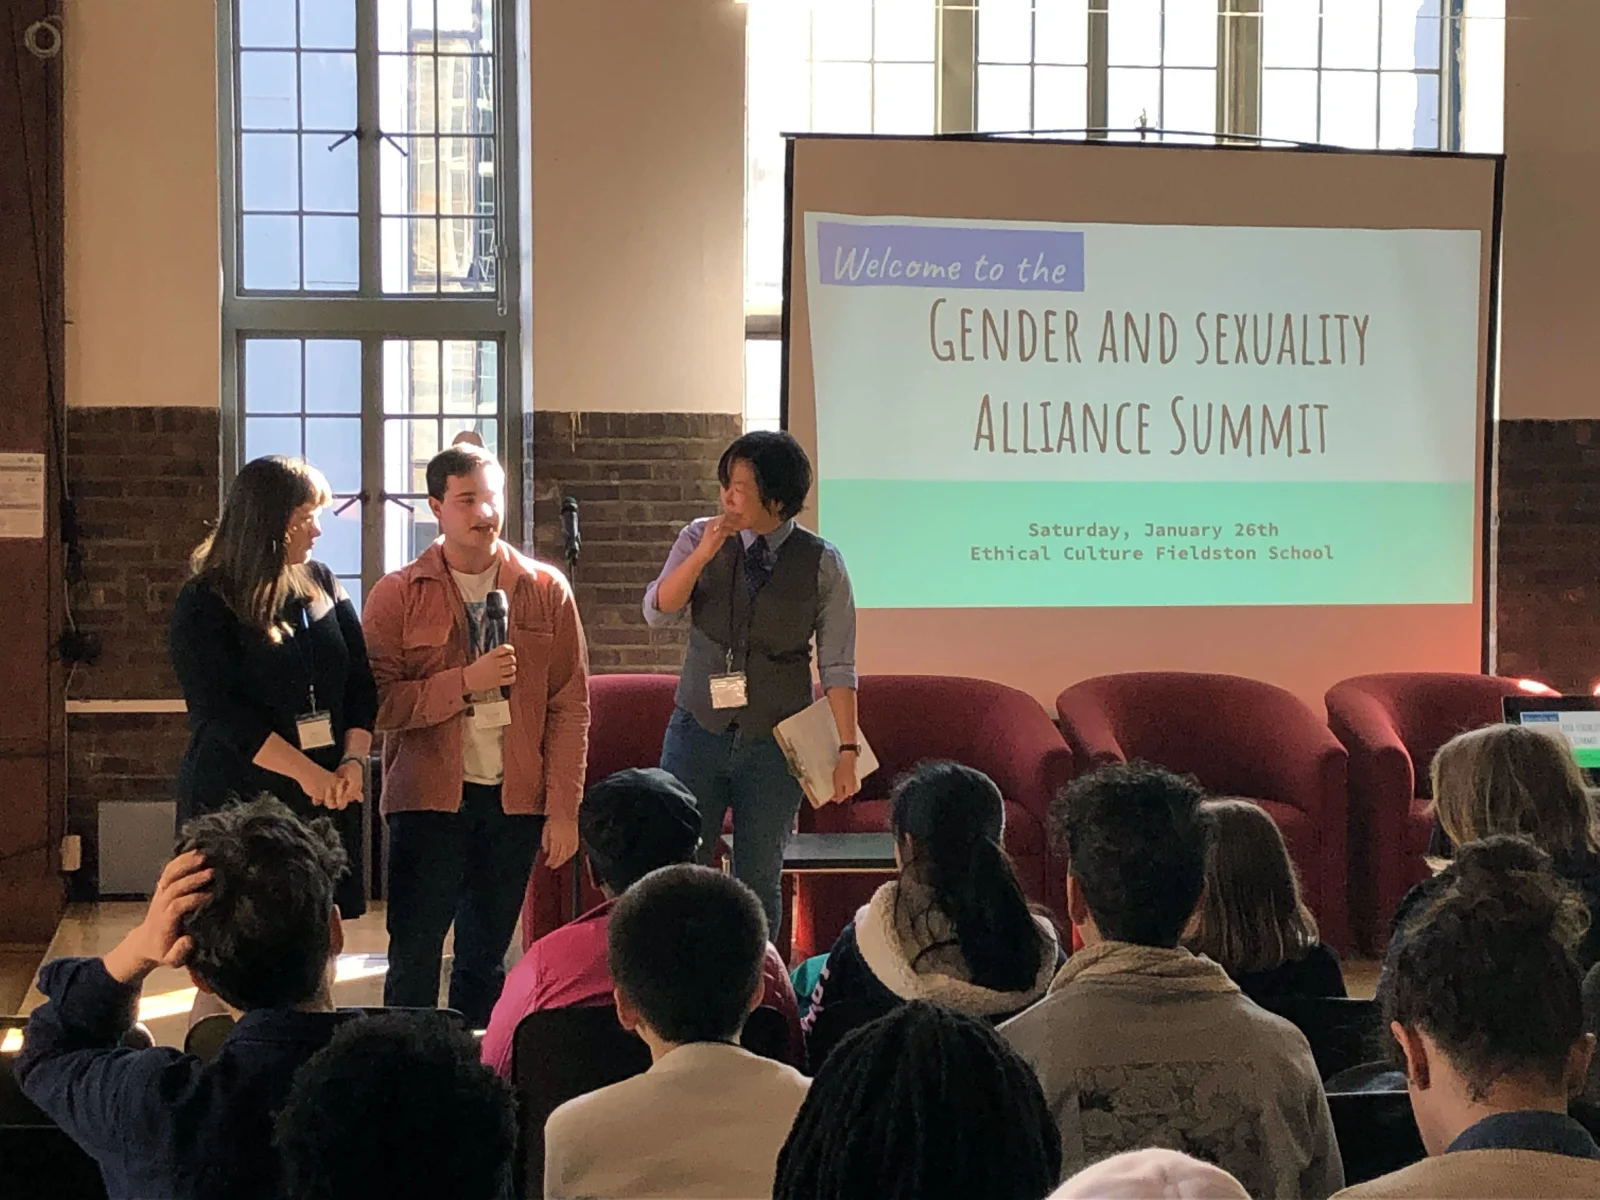 ECFS hosts the Gender and Sexuality Alliance Summit in January, 2019.